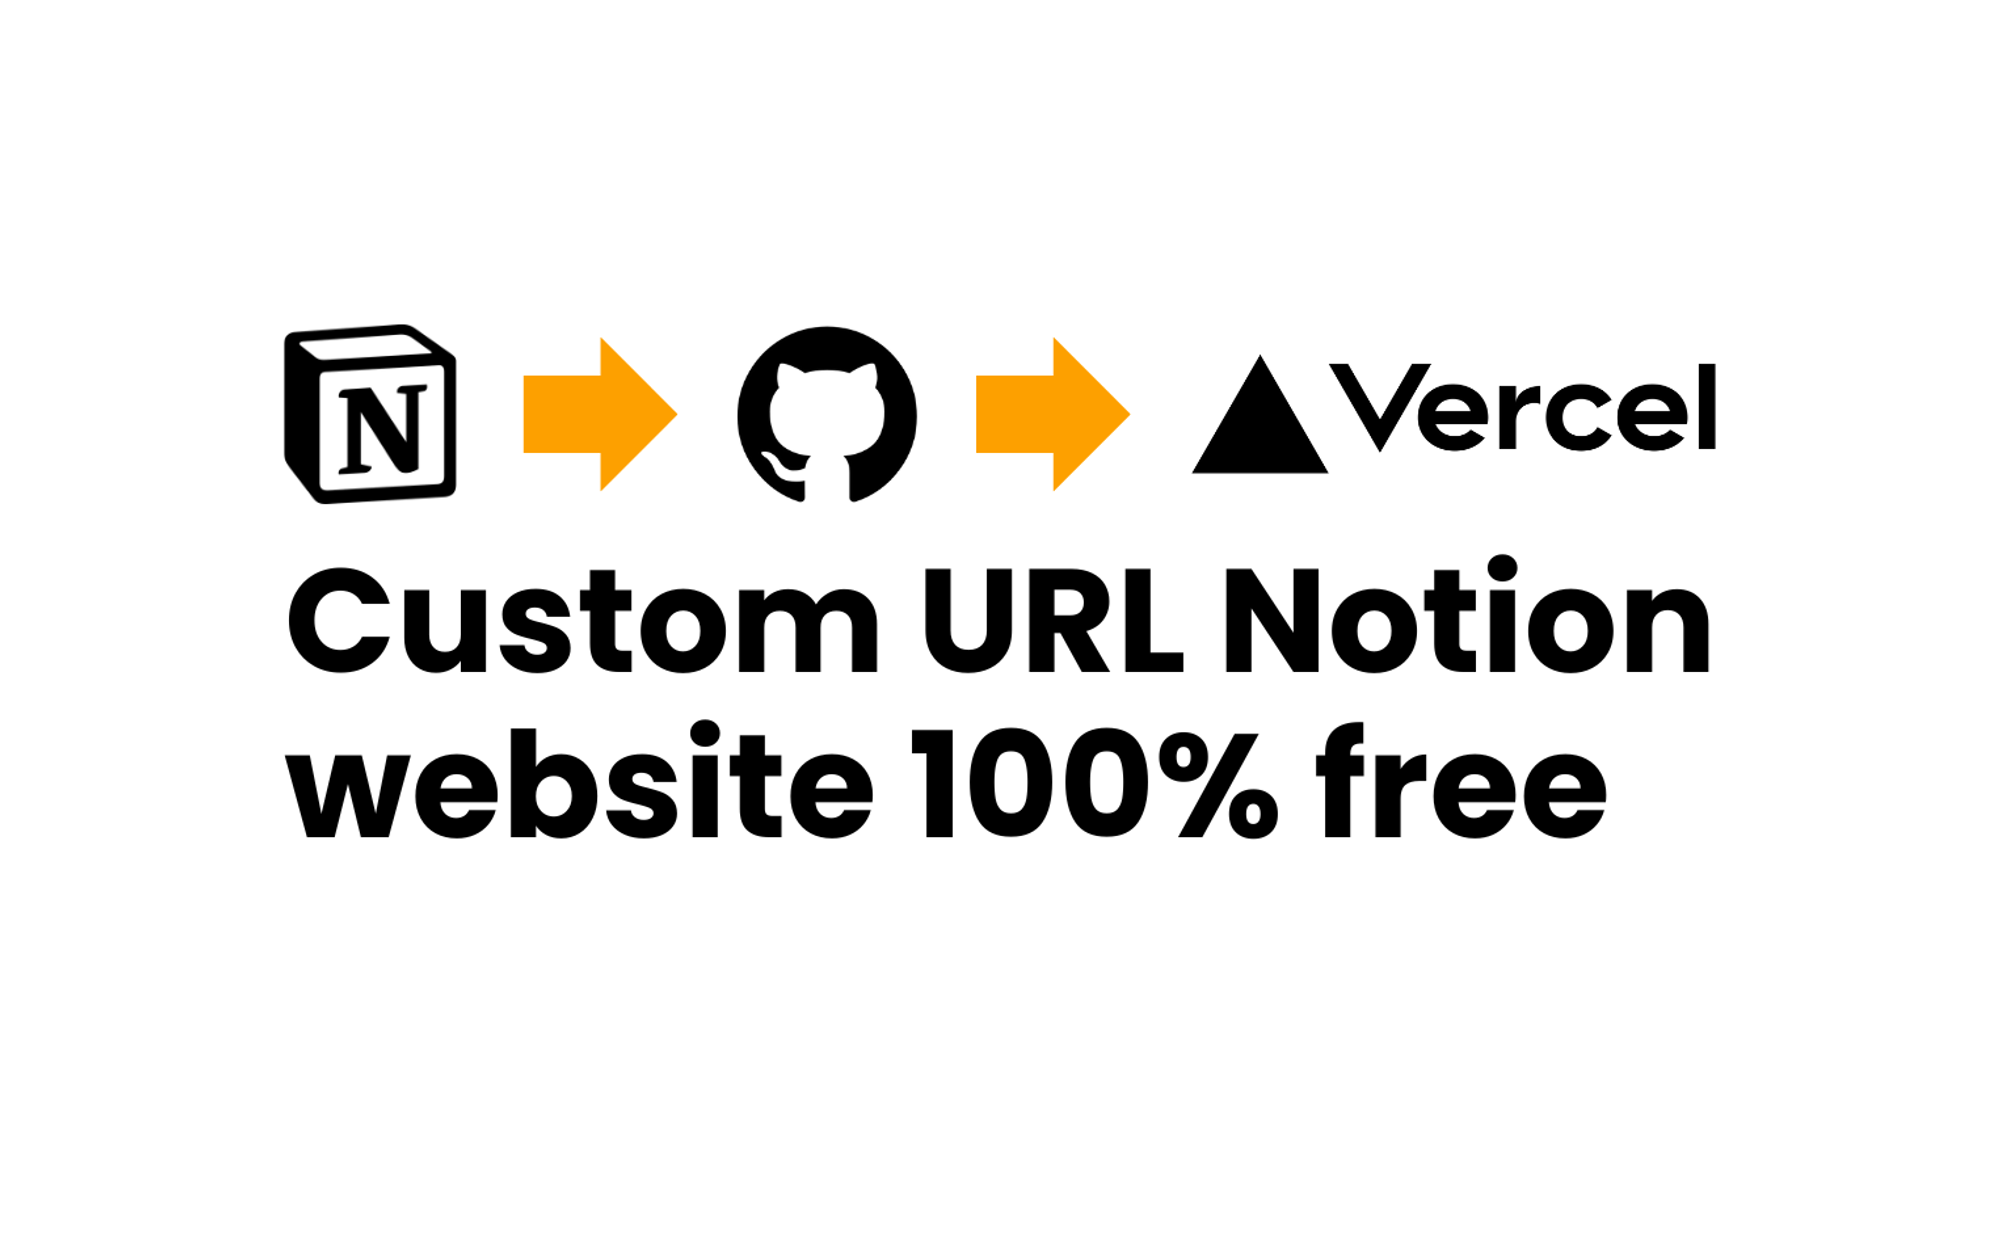 How to make a custom url Notion website for free